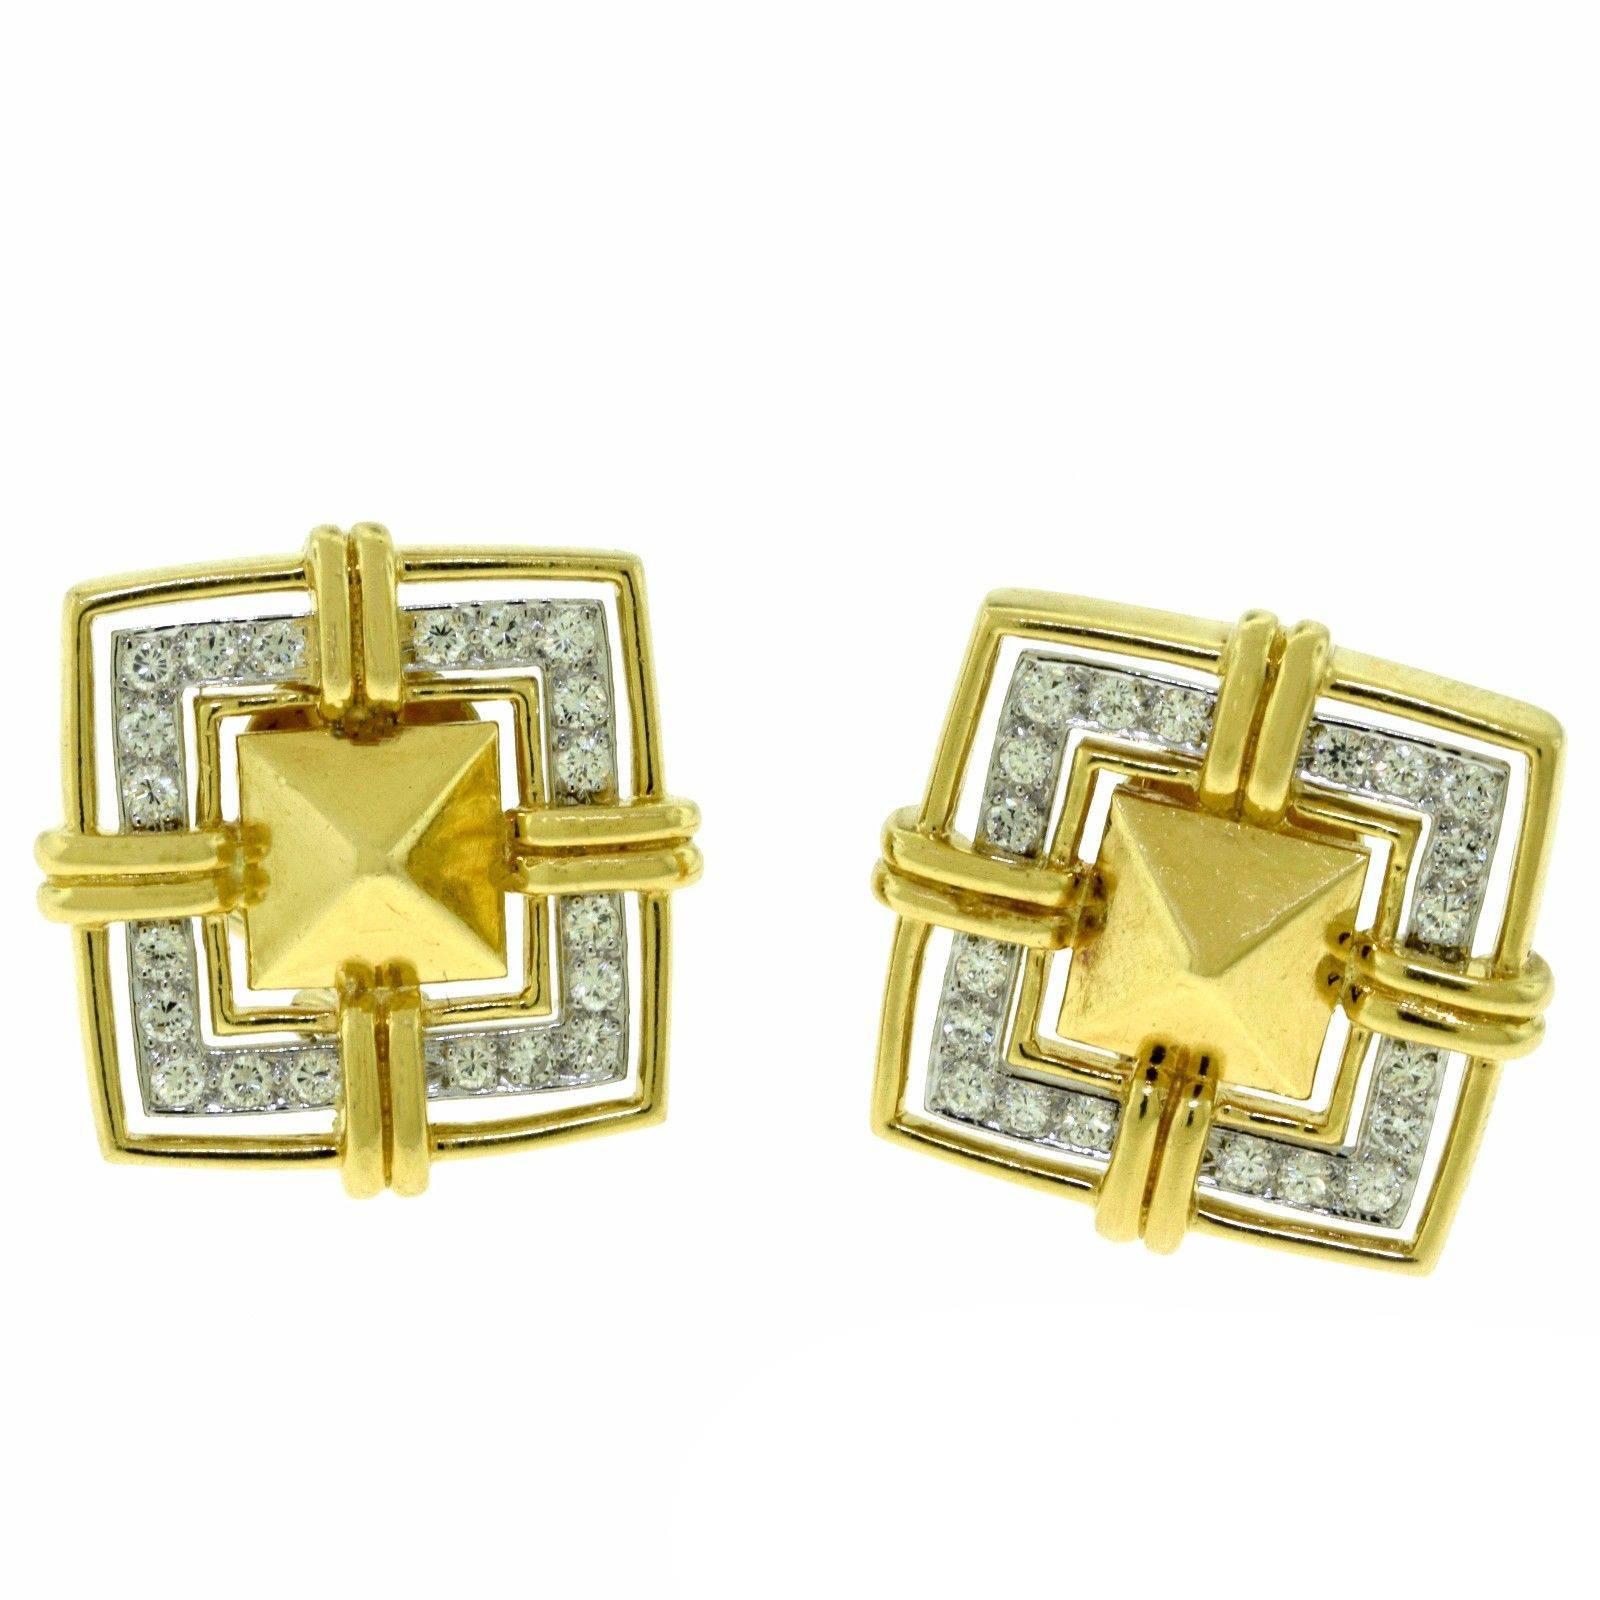 Cartier 18 Karat Yellow Gold Square Pyramid Diamond Earrings For Sale